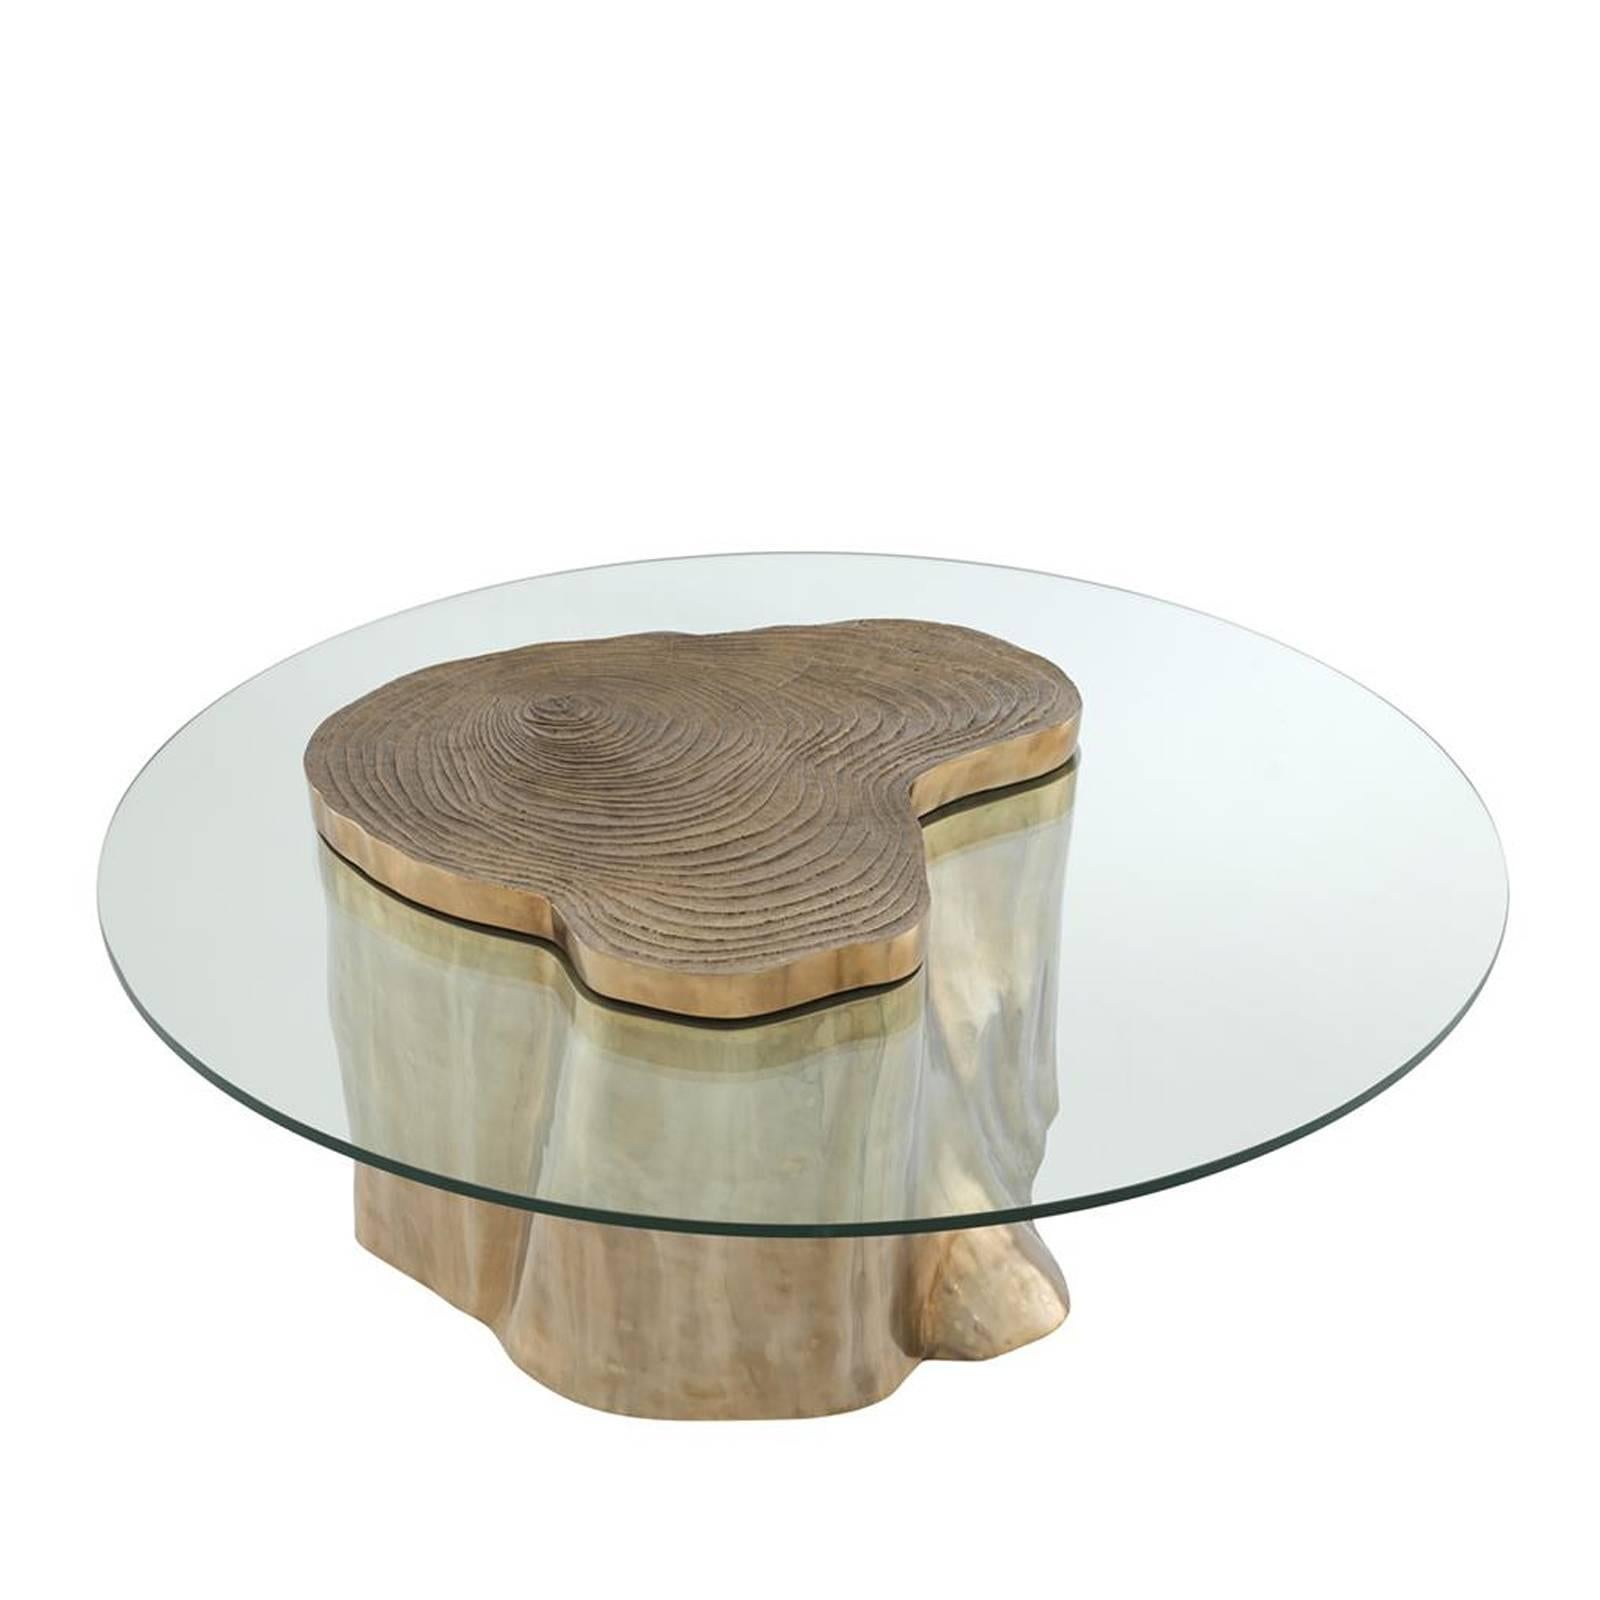 Coffee table solid trunk with structure in
polished brass finish. With clear glass top.
